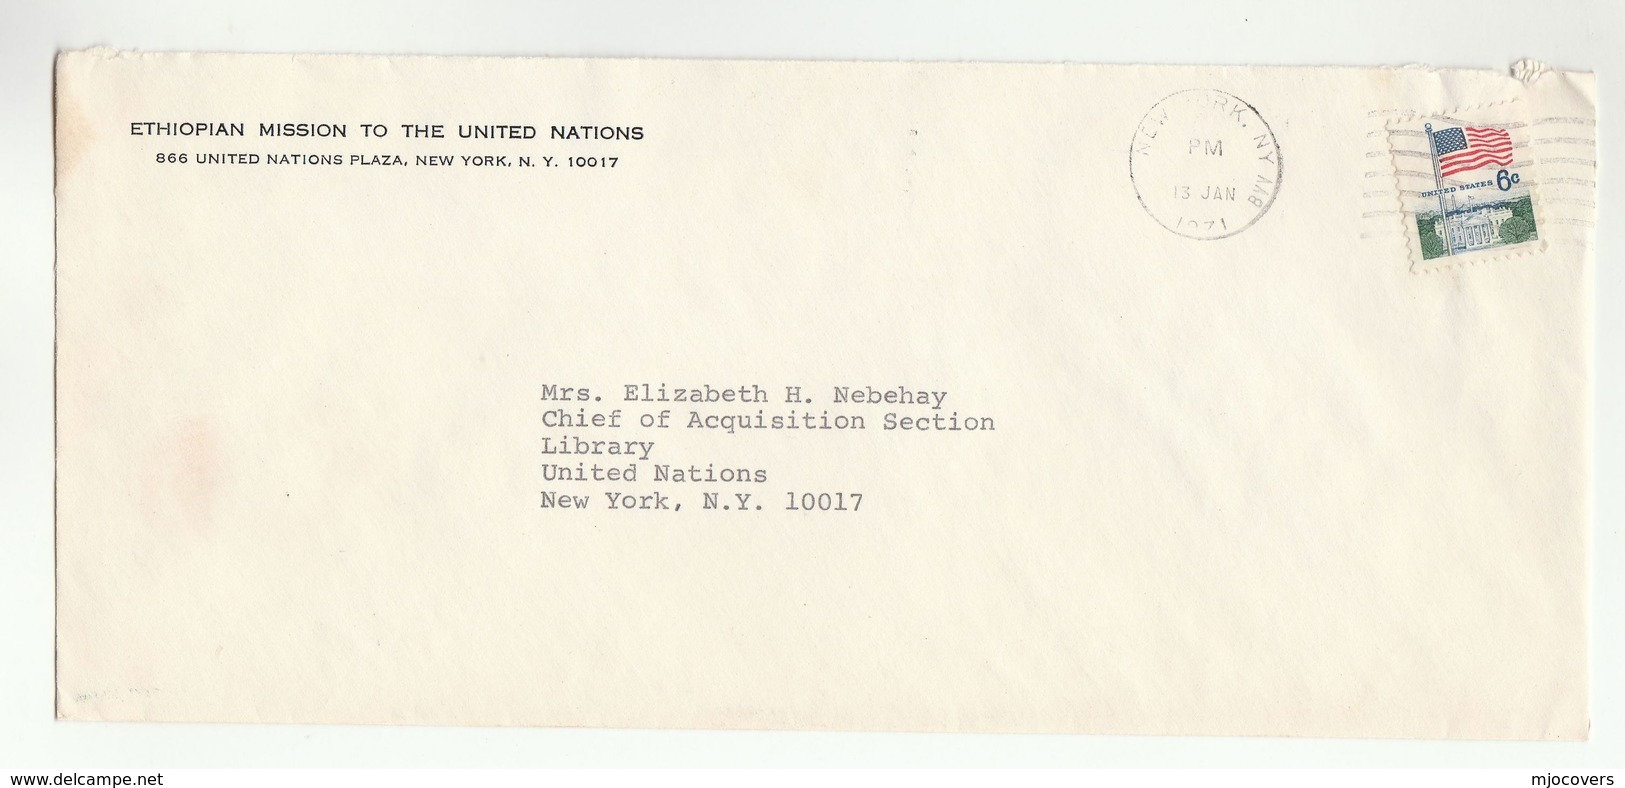 1971 ETHIOPIA At UN -  ' ETHIOPIAN MISSION TO UNITED NATIONS' COVER Usa Stamps Diplomatic - Ethiopia